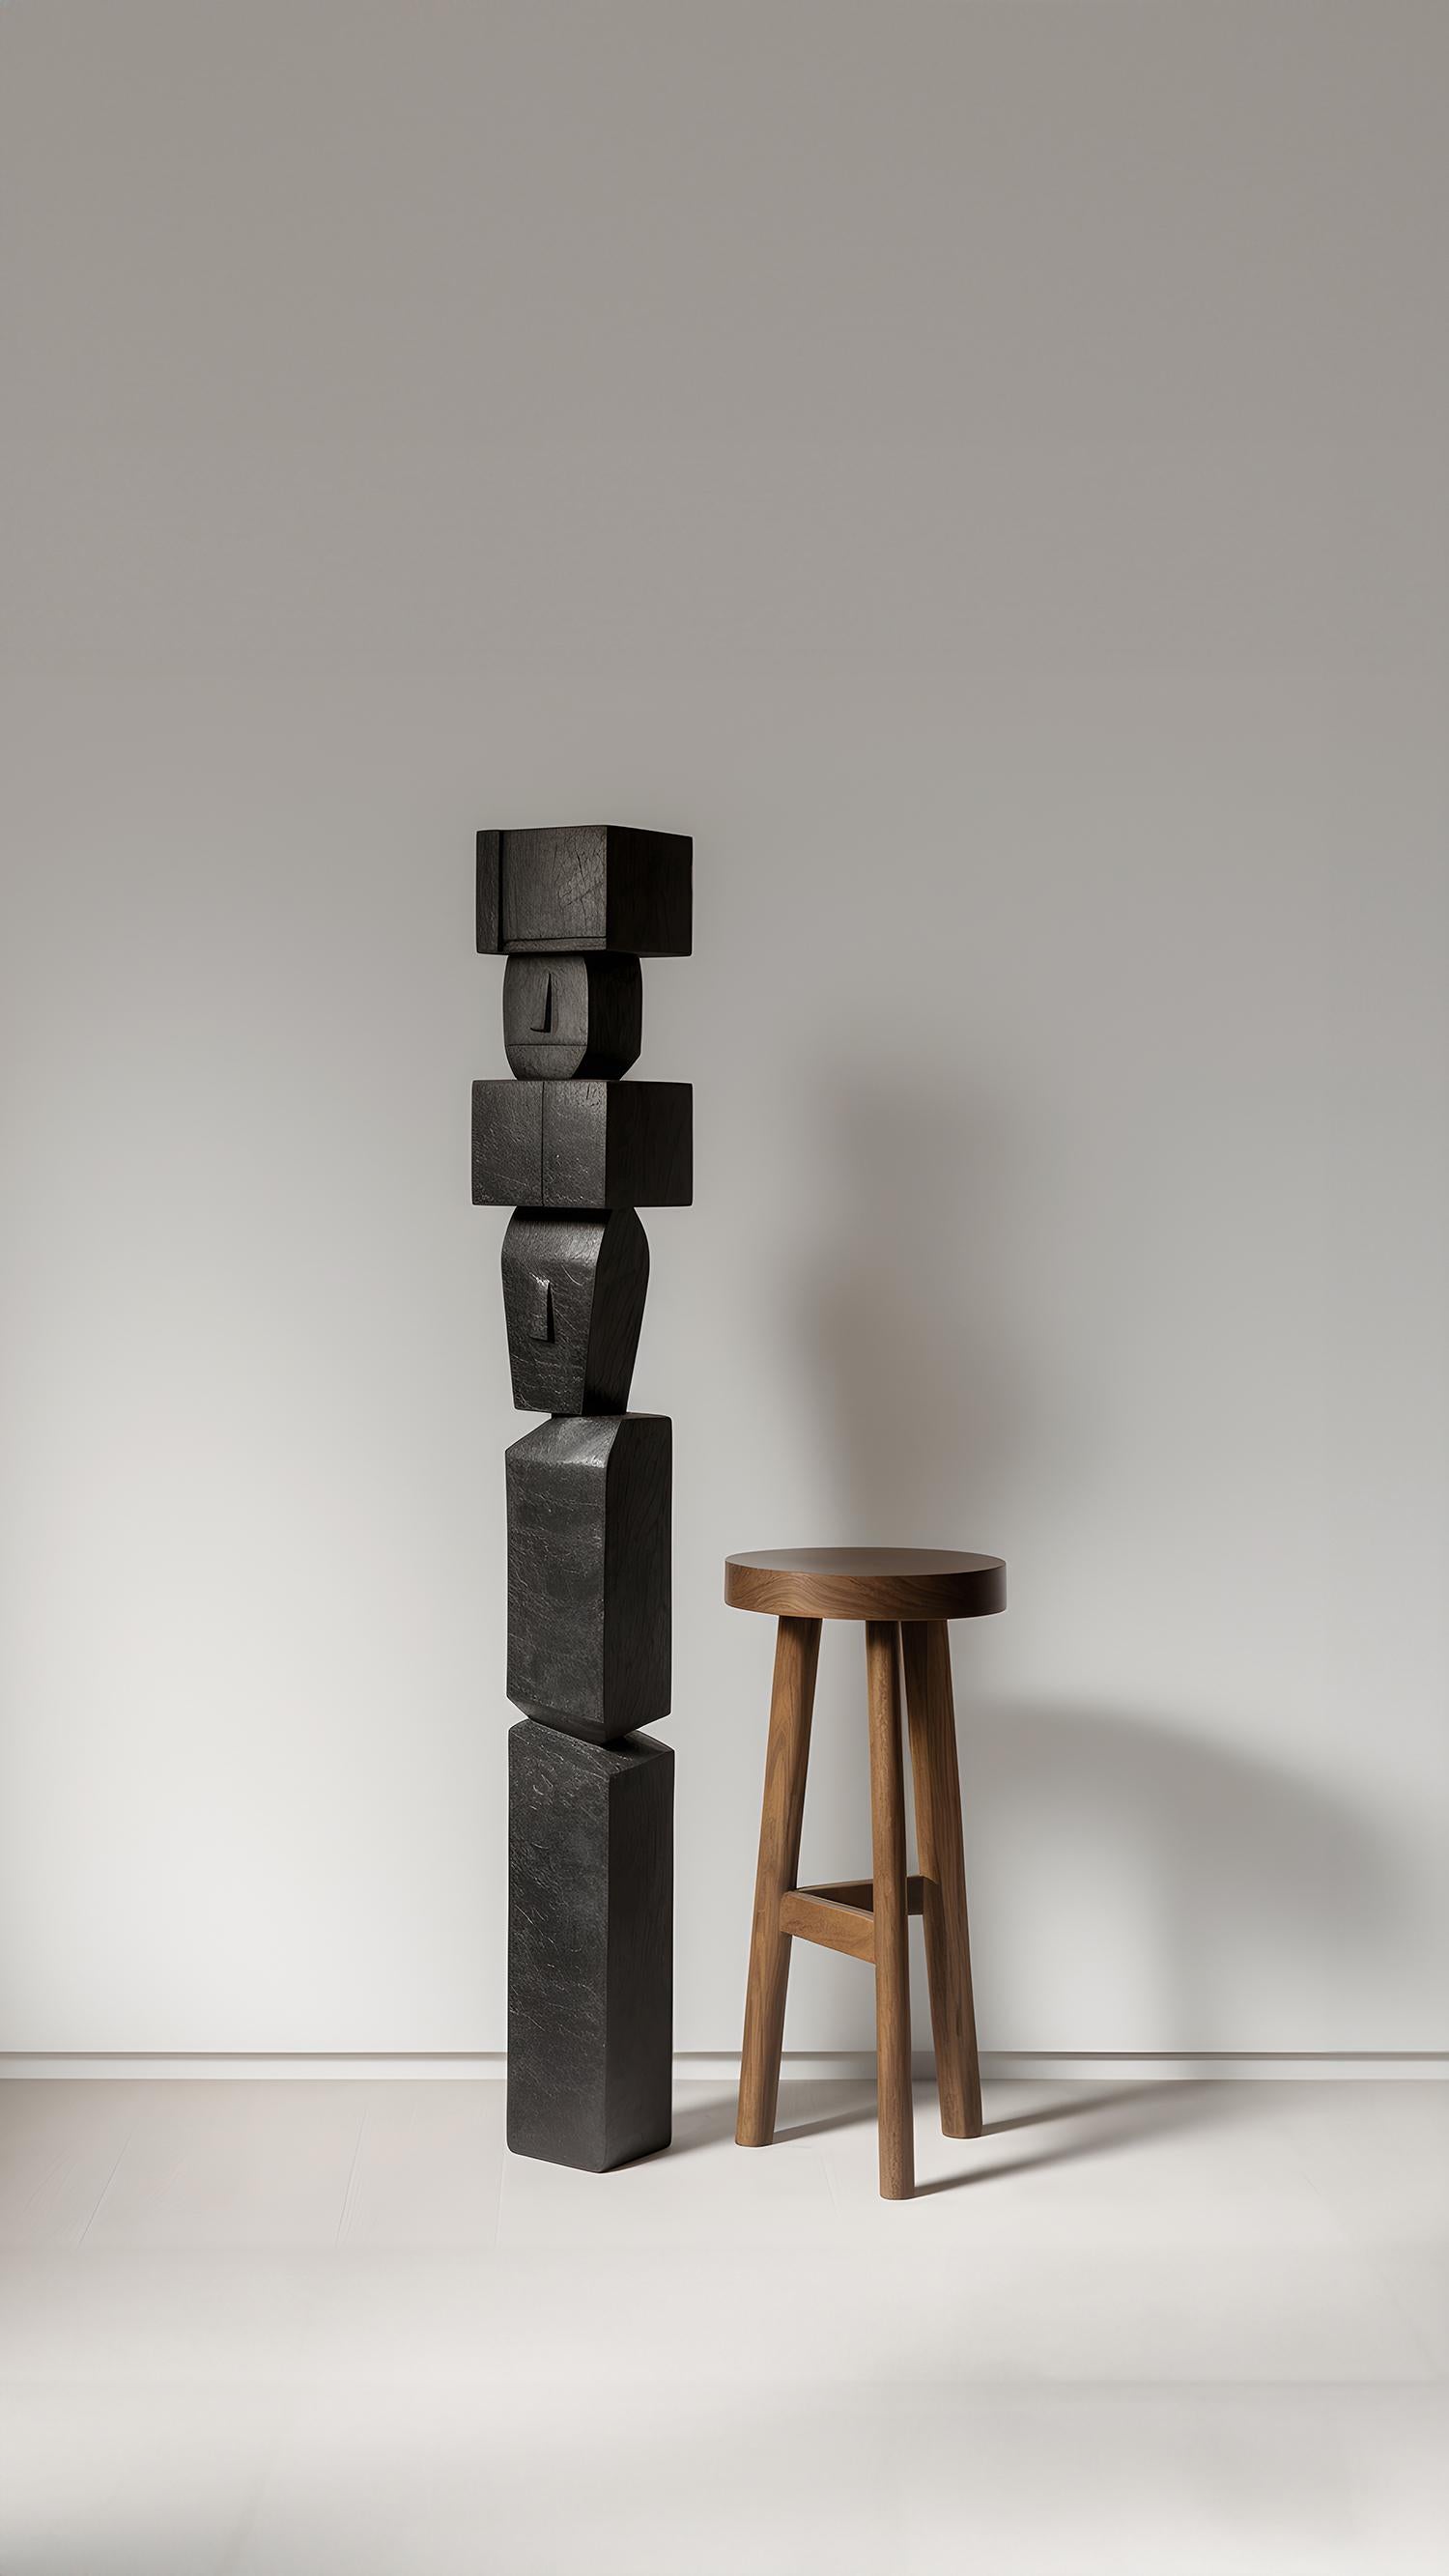 Hand-Crafted Monumental Wooden Sculpture Inspired in Constantin Brancusi, Unseen Force 26 For Sale